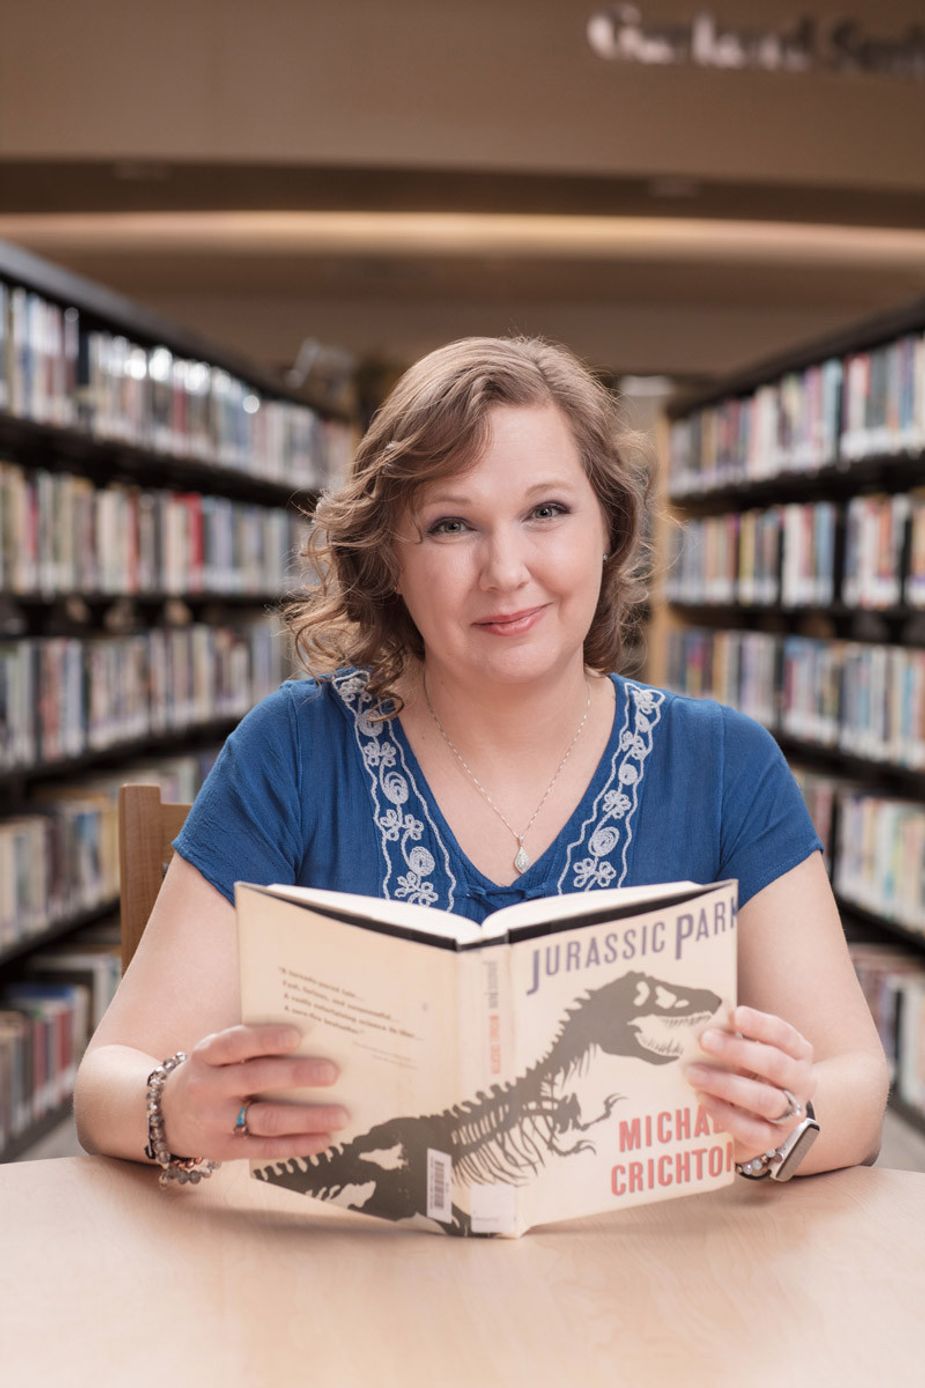 Tina Bennett is the director of the Garland Smith Public Library in Marlow. Like many libraries, it is supported by a local Friends of the Library organization that assists with fundraising and programming. Photo courtest Brent Fuchs